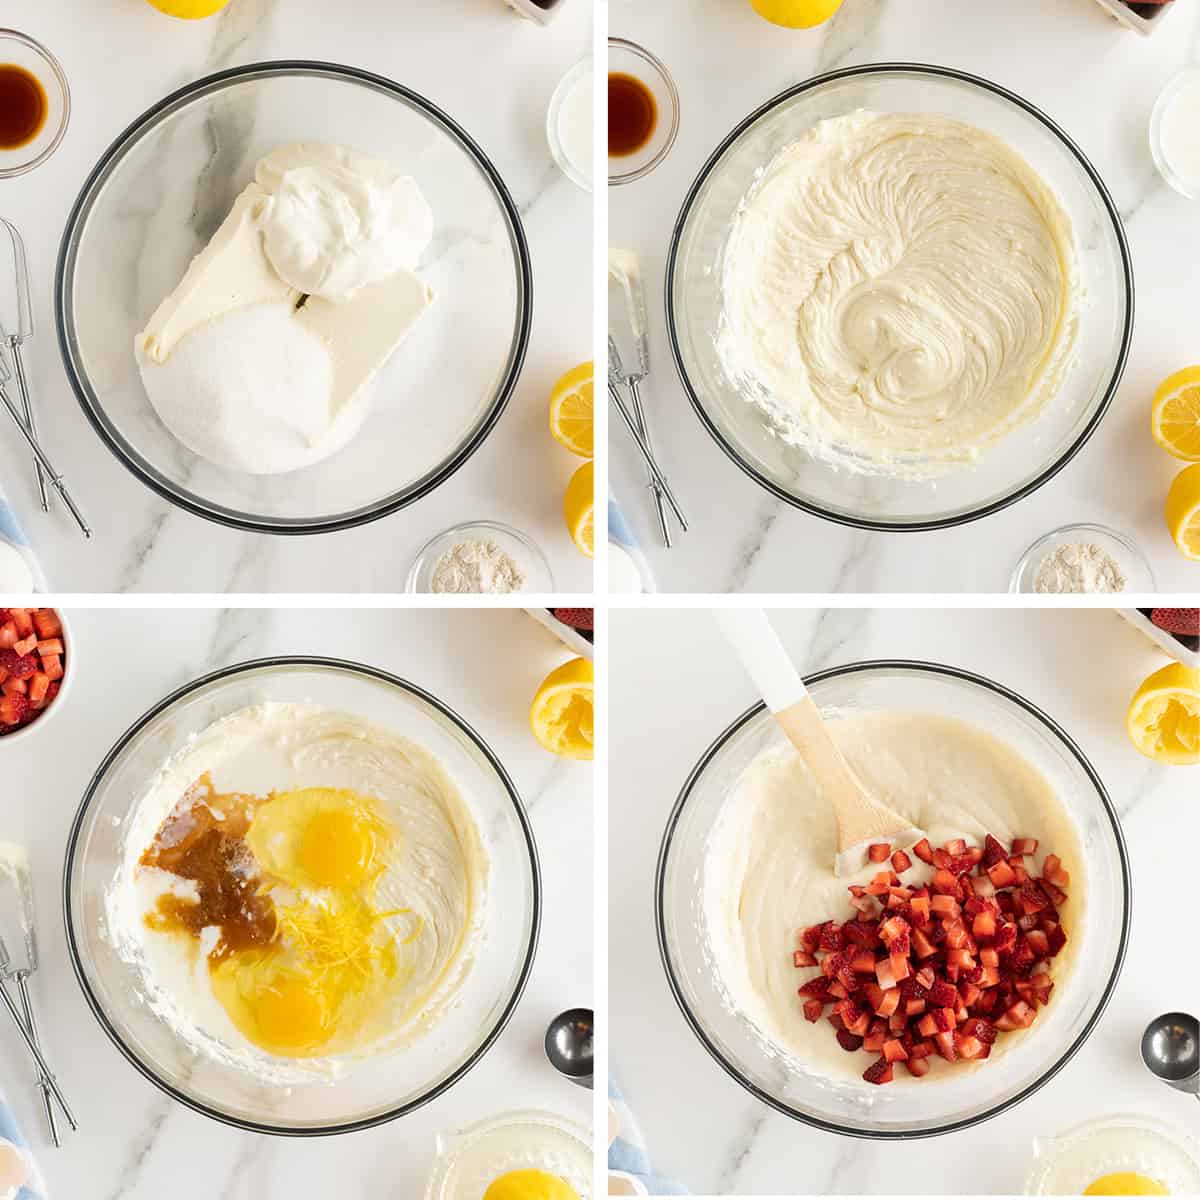 Four images of cream cheese, sugar, and strawberries combined with other ingredients in a glass mixing bowl.